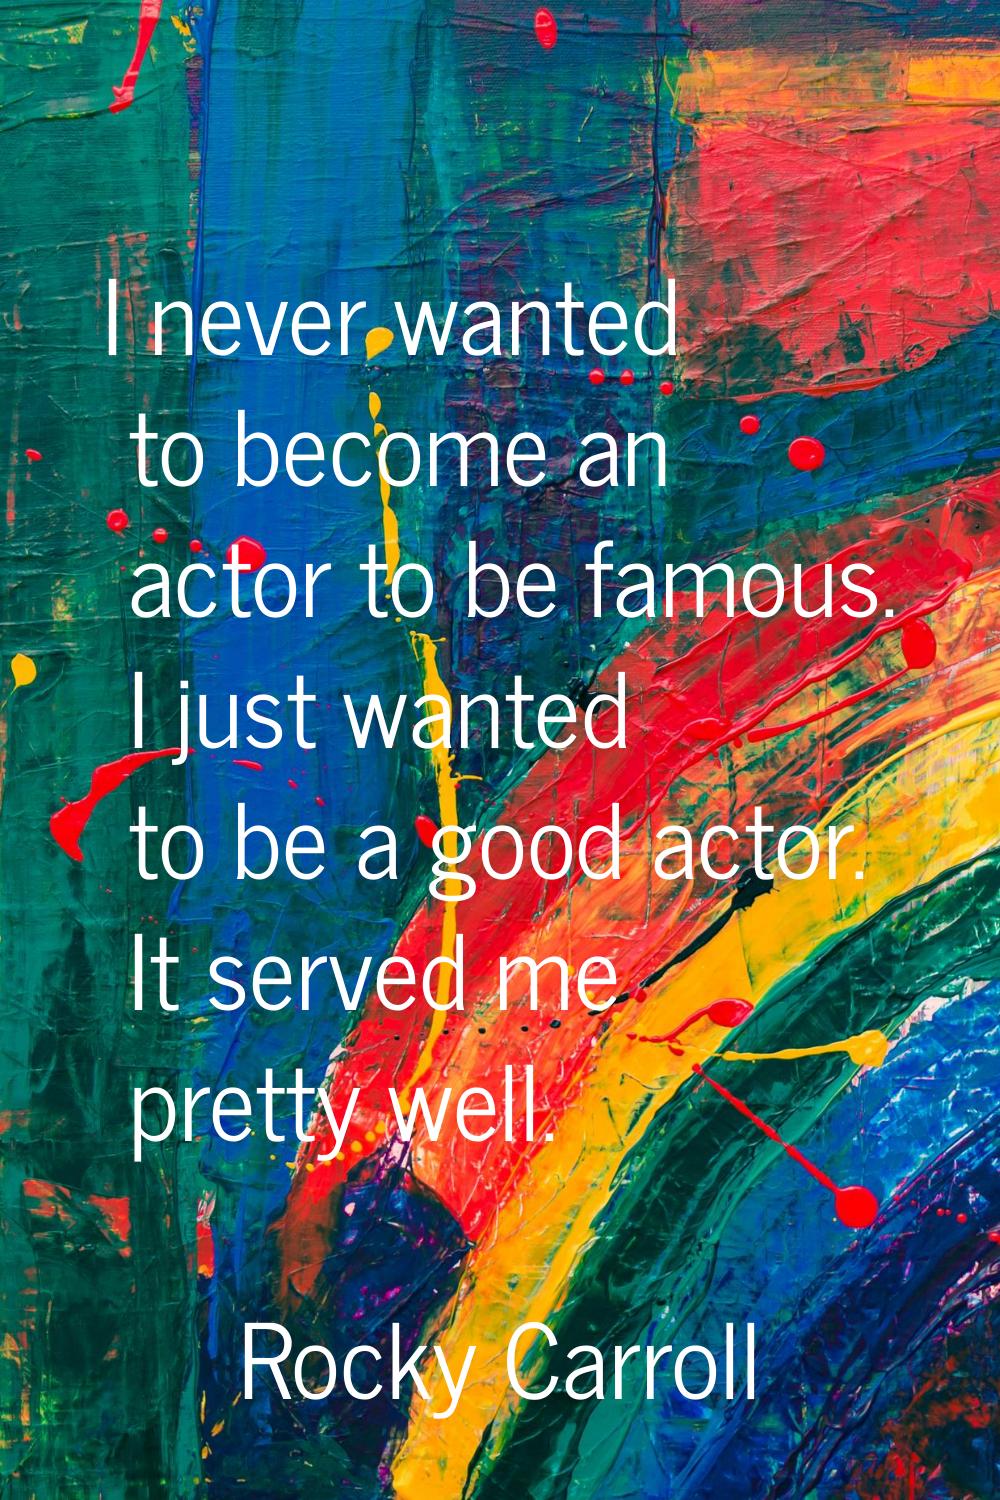 I never wanted to become an actor to be famous. I just wanted to be a good actor. It served me pret